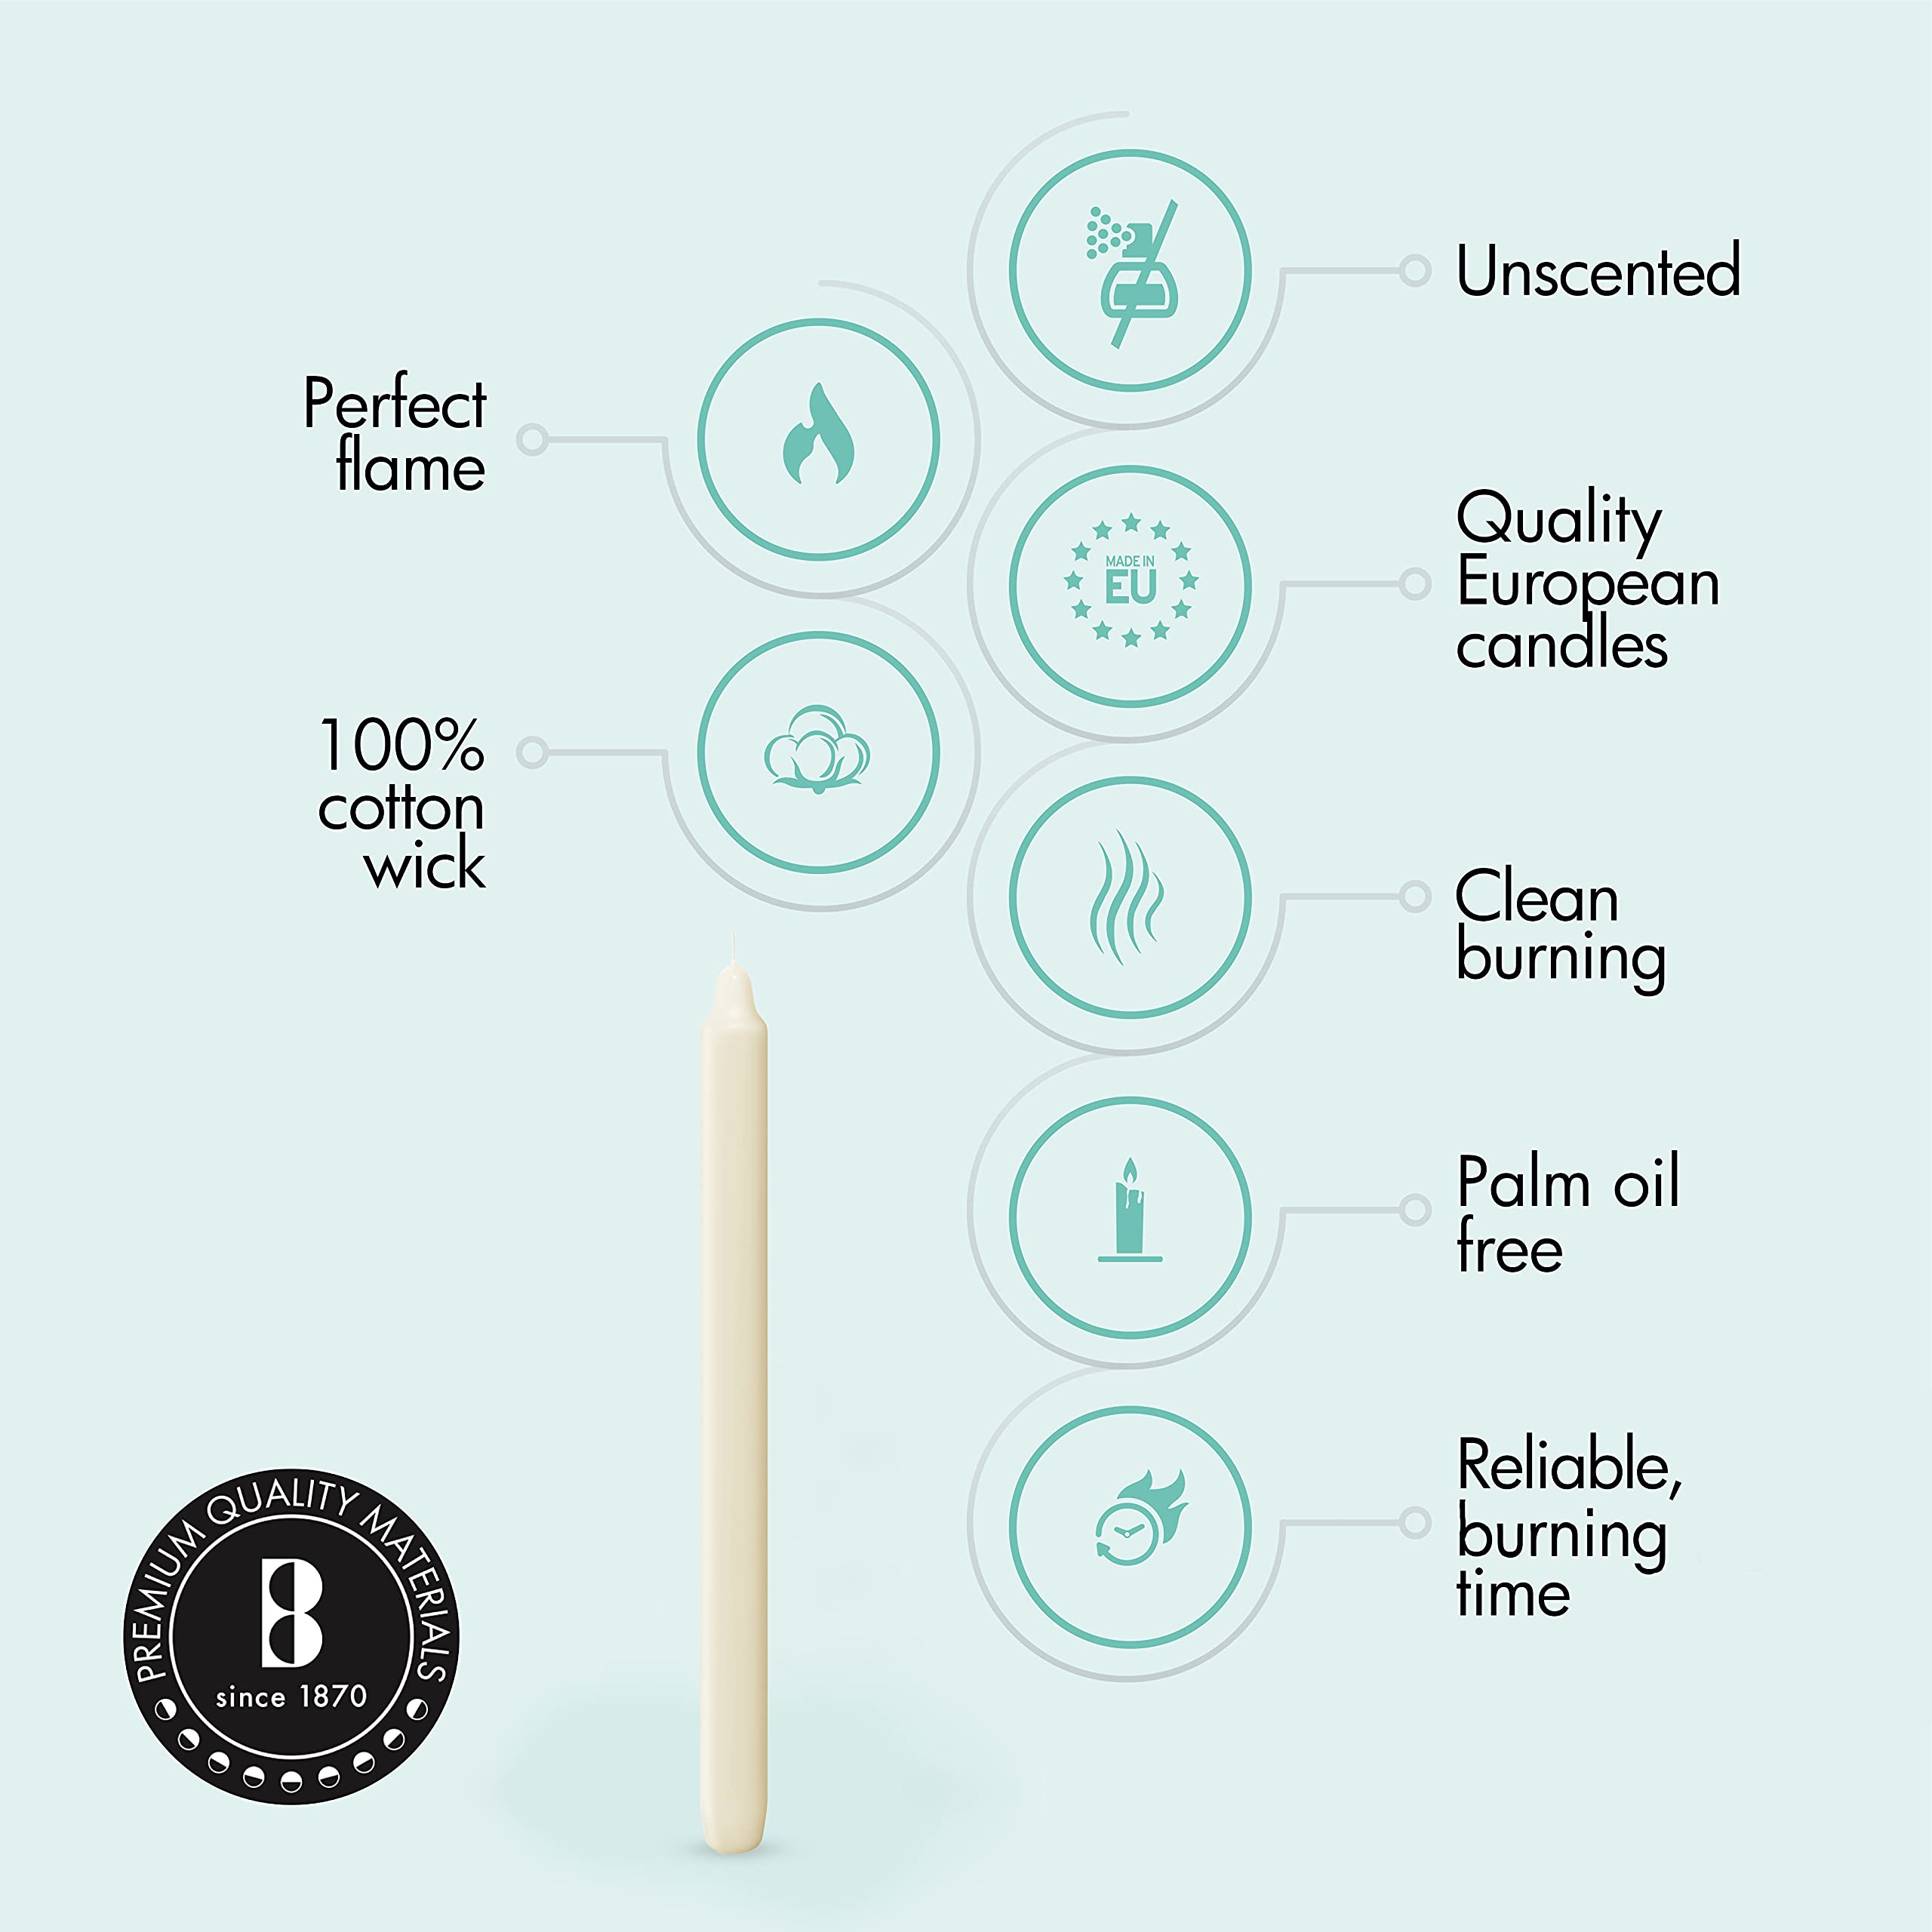 BOLSIUS Ivory Candlesticks Bulk Pack 50 Count - Unscented Dripless 11.5 Inch Household & Dinner Candle Set - 12+ Hours - Premium European Quality - Consistent Smokeless Flame - 100% Cotton Wick  - Like New